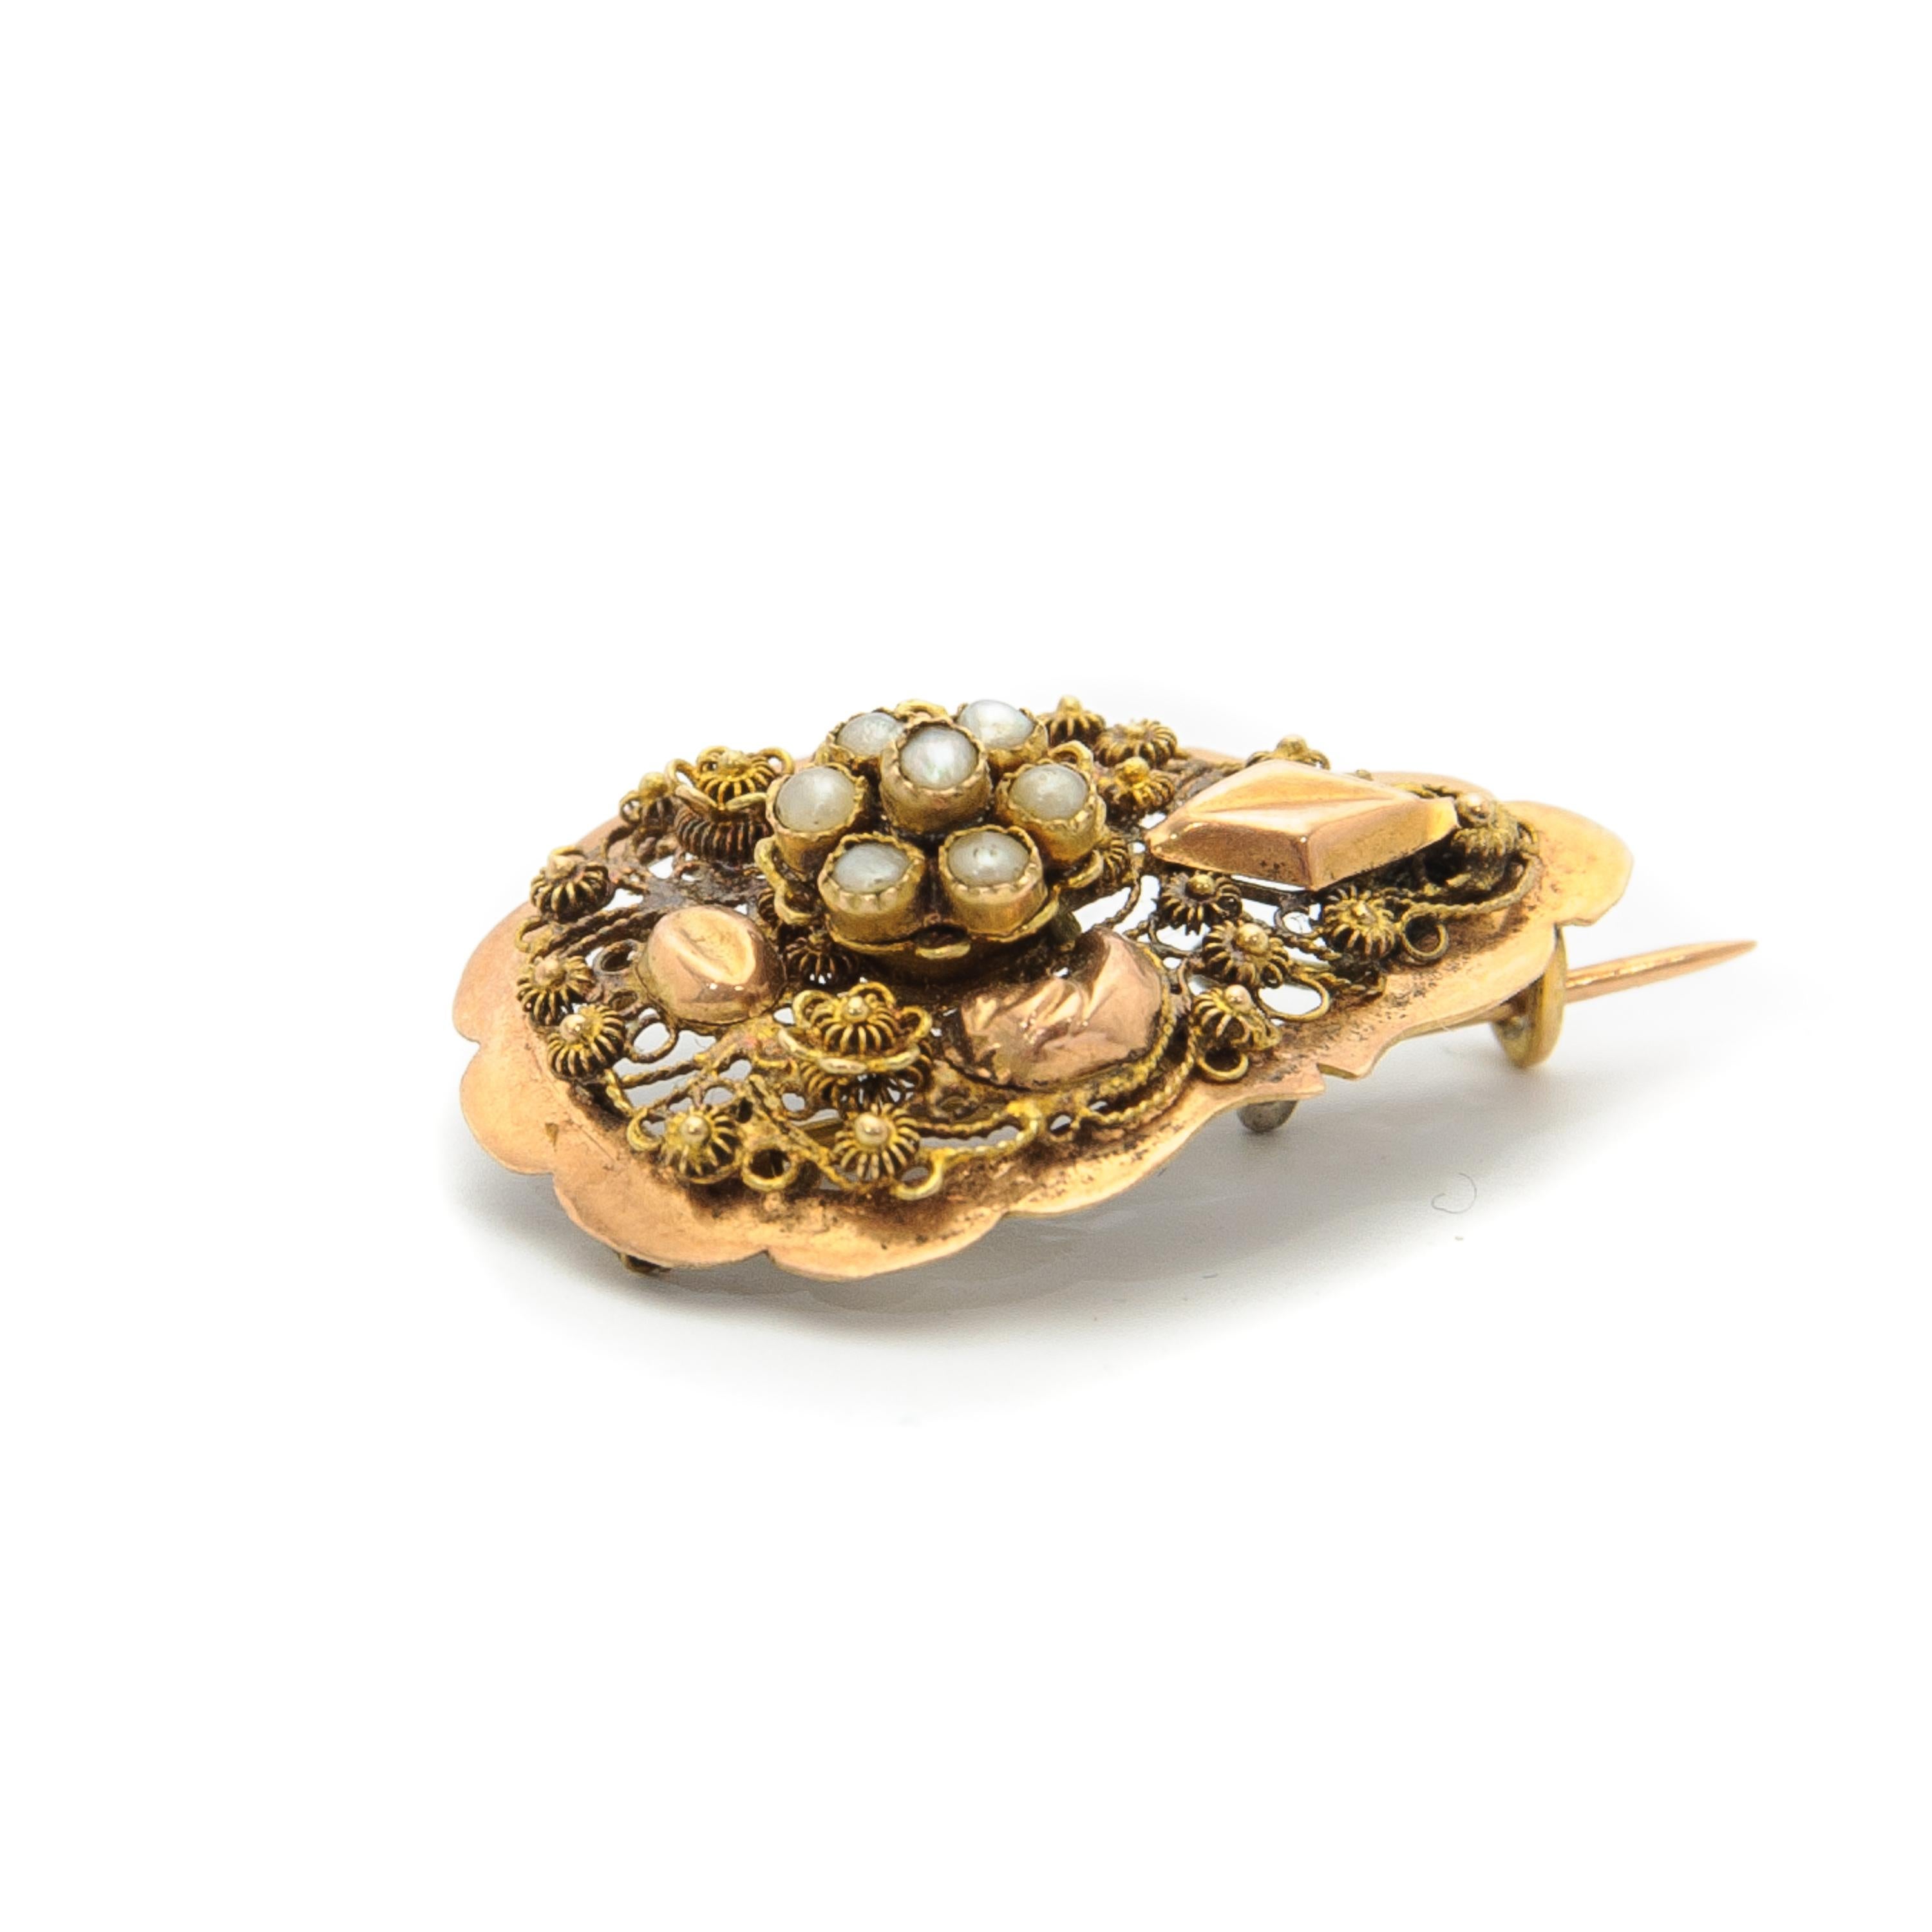 An antique 19th century drop-shaped brooch created in 14 karat gold. The brooch is set with seven seed pearls and the surface is beautifully detailed with fine filigree and cannetille work. Cannetille typically features fine gold wires or thinly